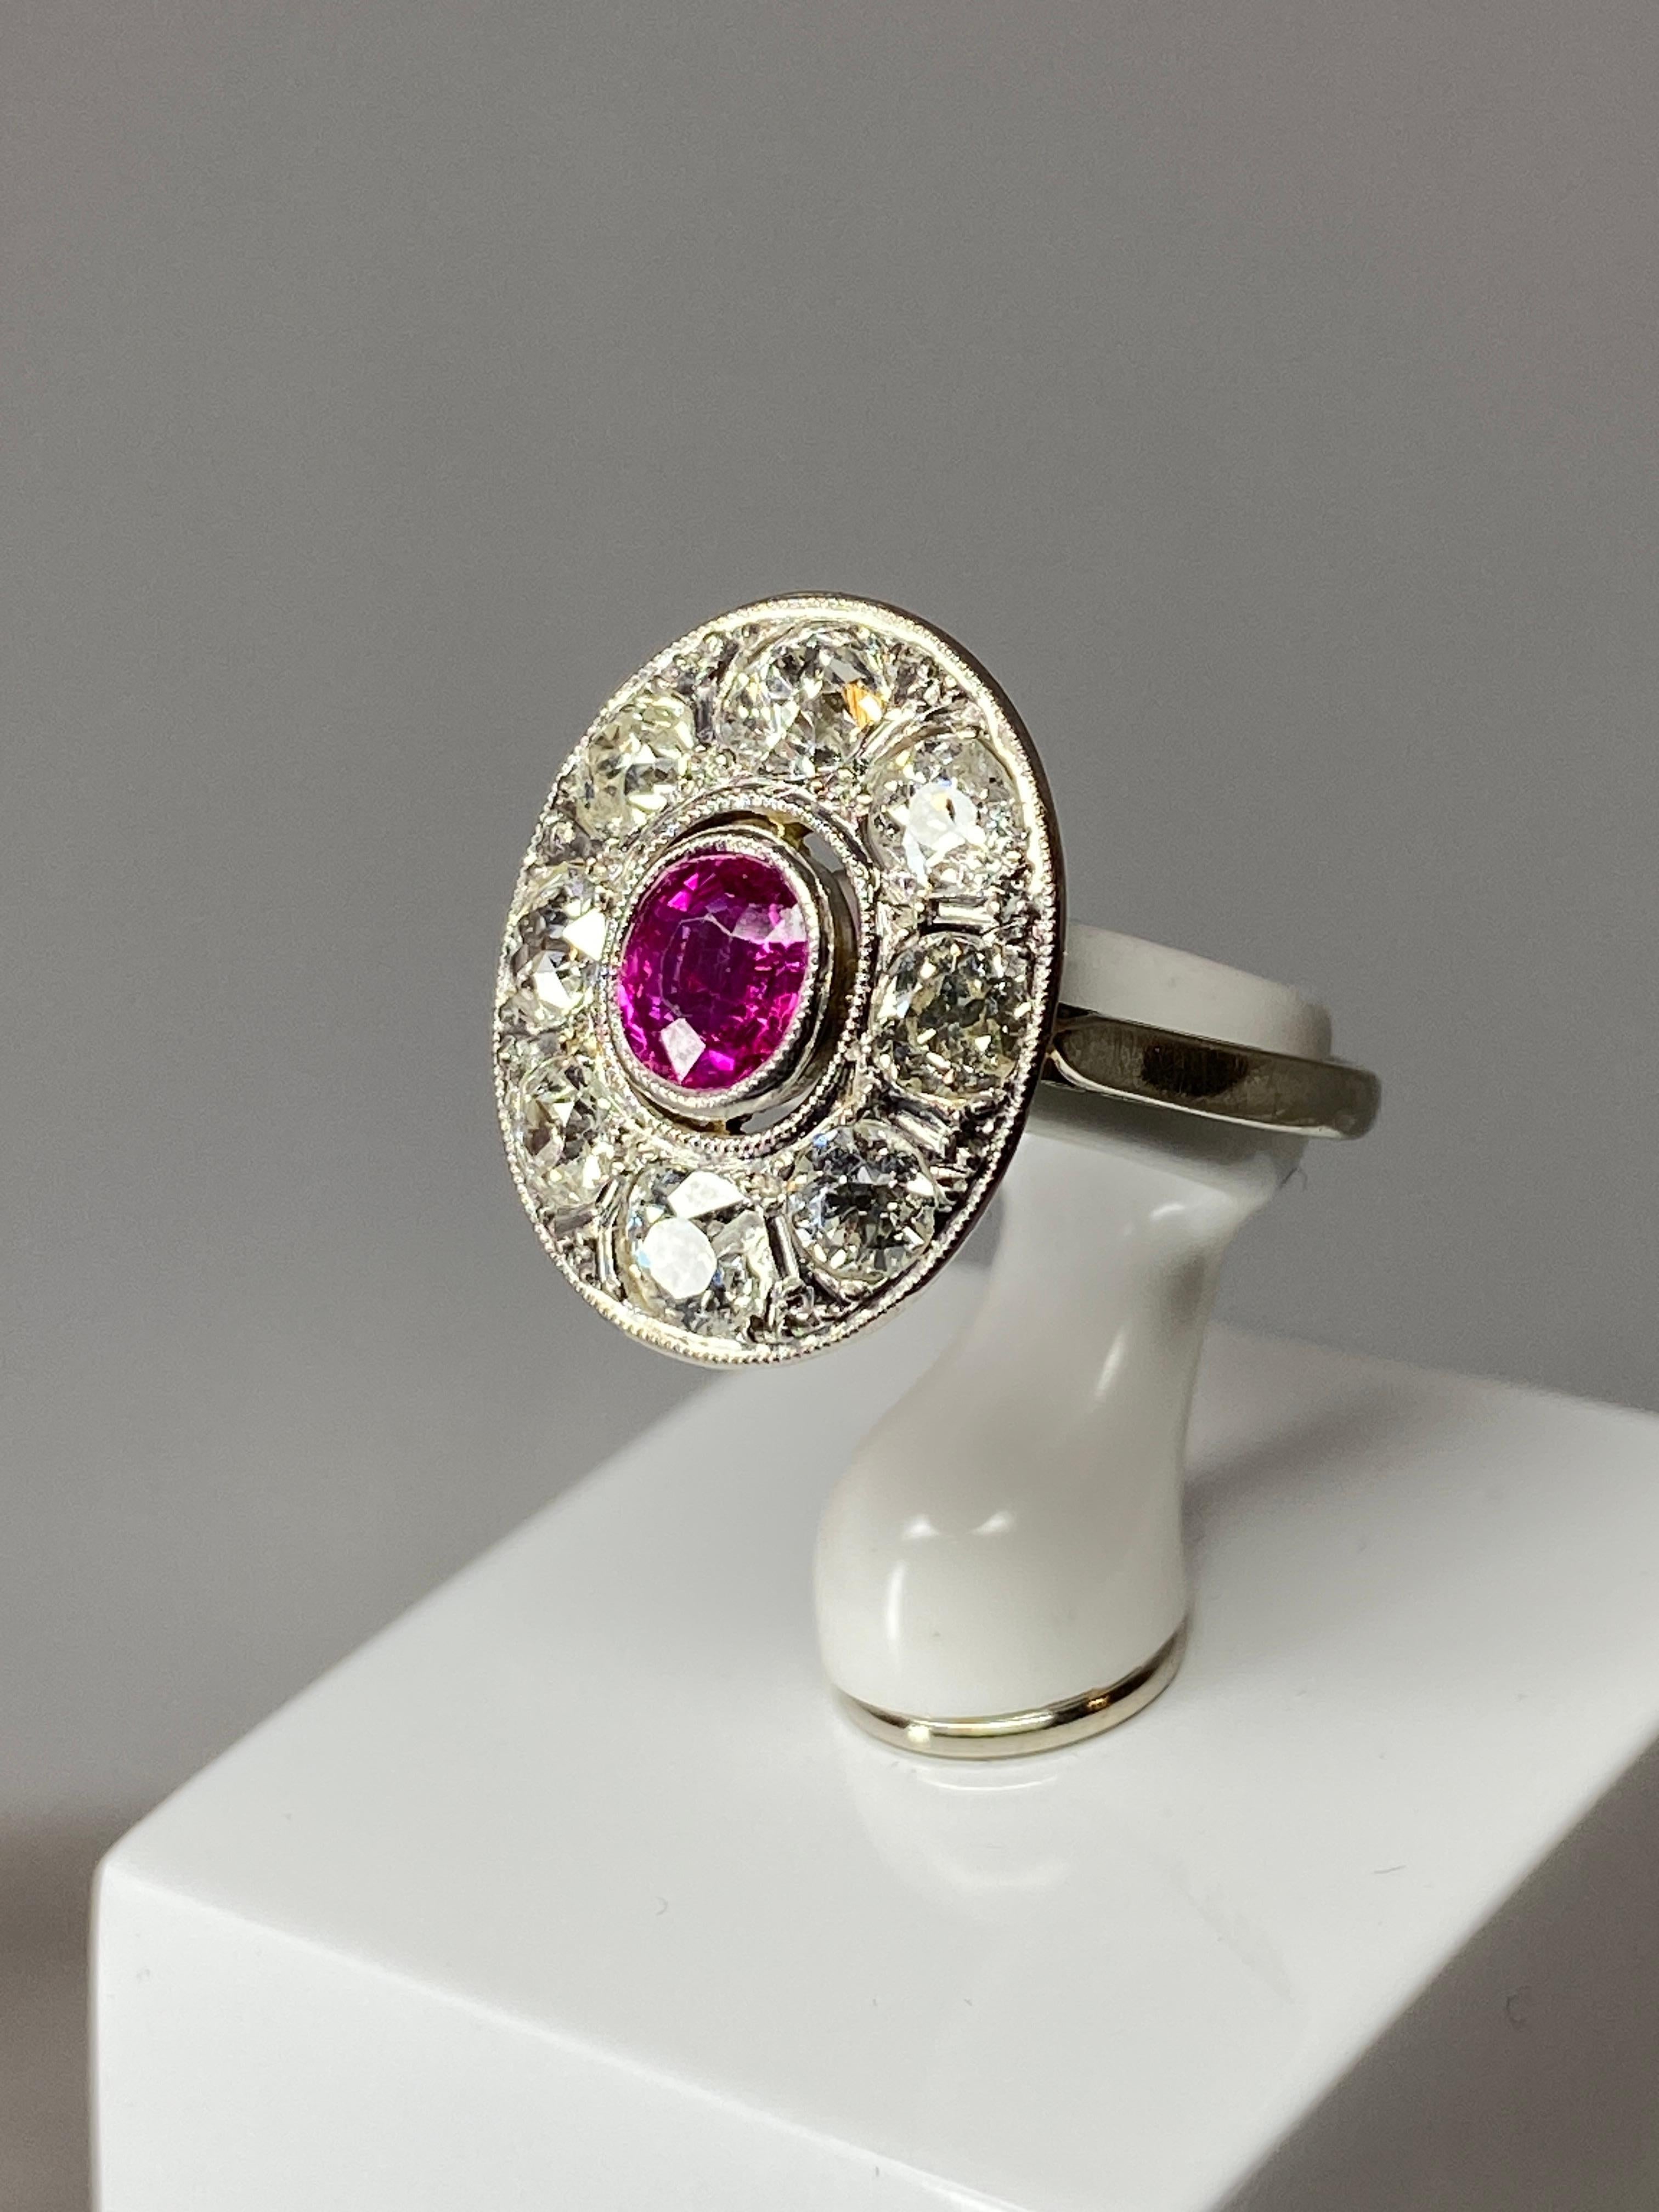 Oval Ring in 18 Carat Gold Set with a Ruby and Diamonds, 1900 Period For Sale 1